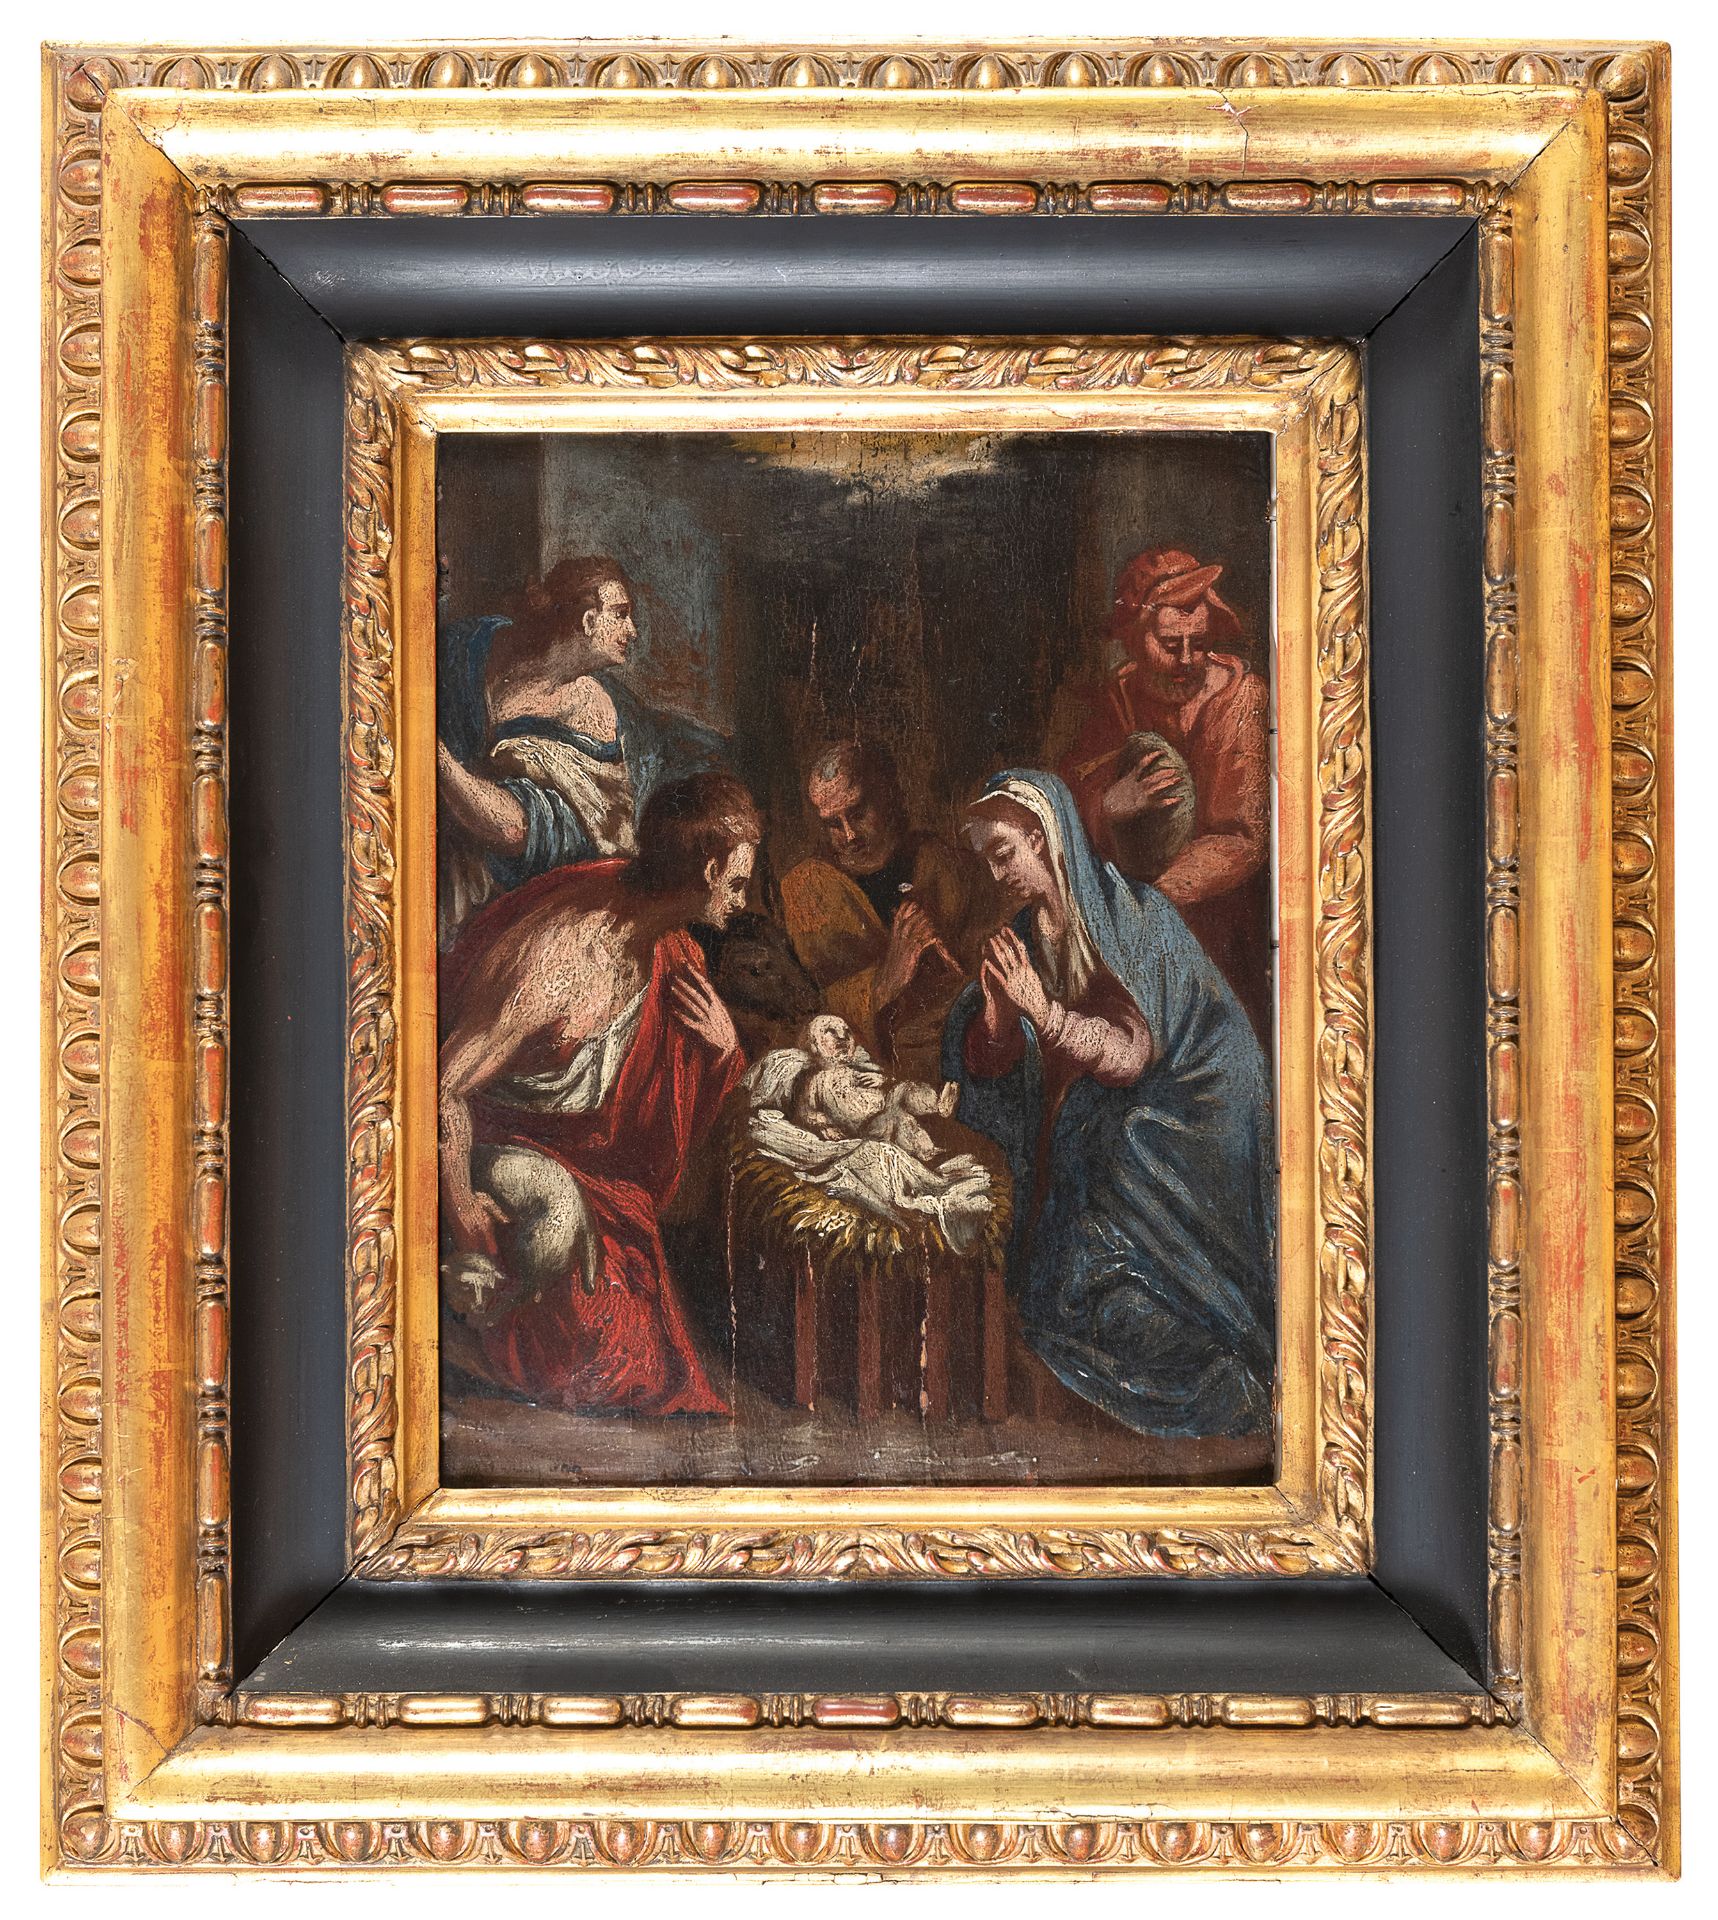 VENETIAN OIL PAINTING END OF THE 16TH CENTURY